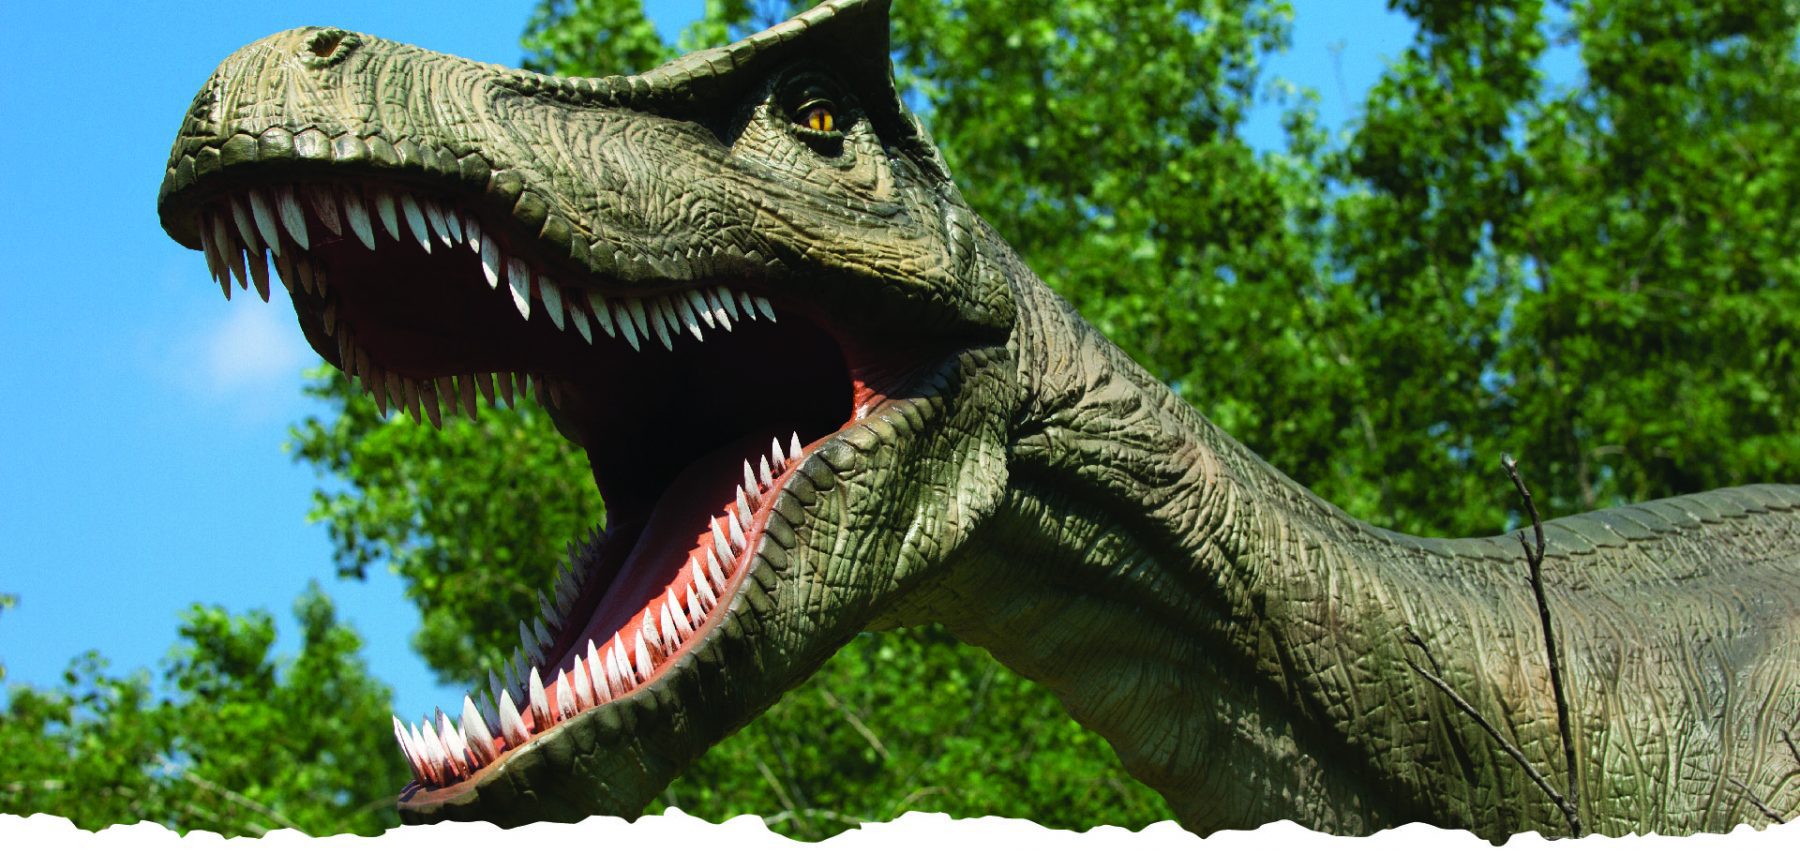 Get up Close and Personal with Dinosaurs at Field Station: Dinosaurs in New Jersey